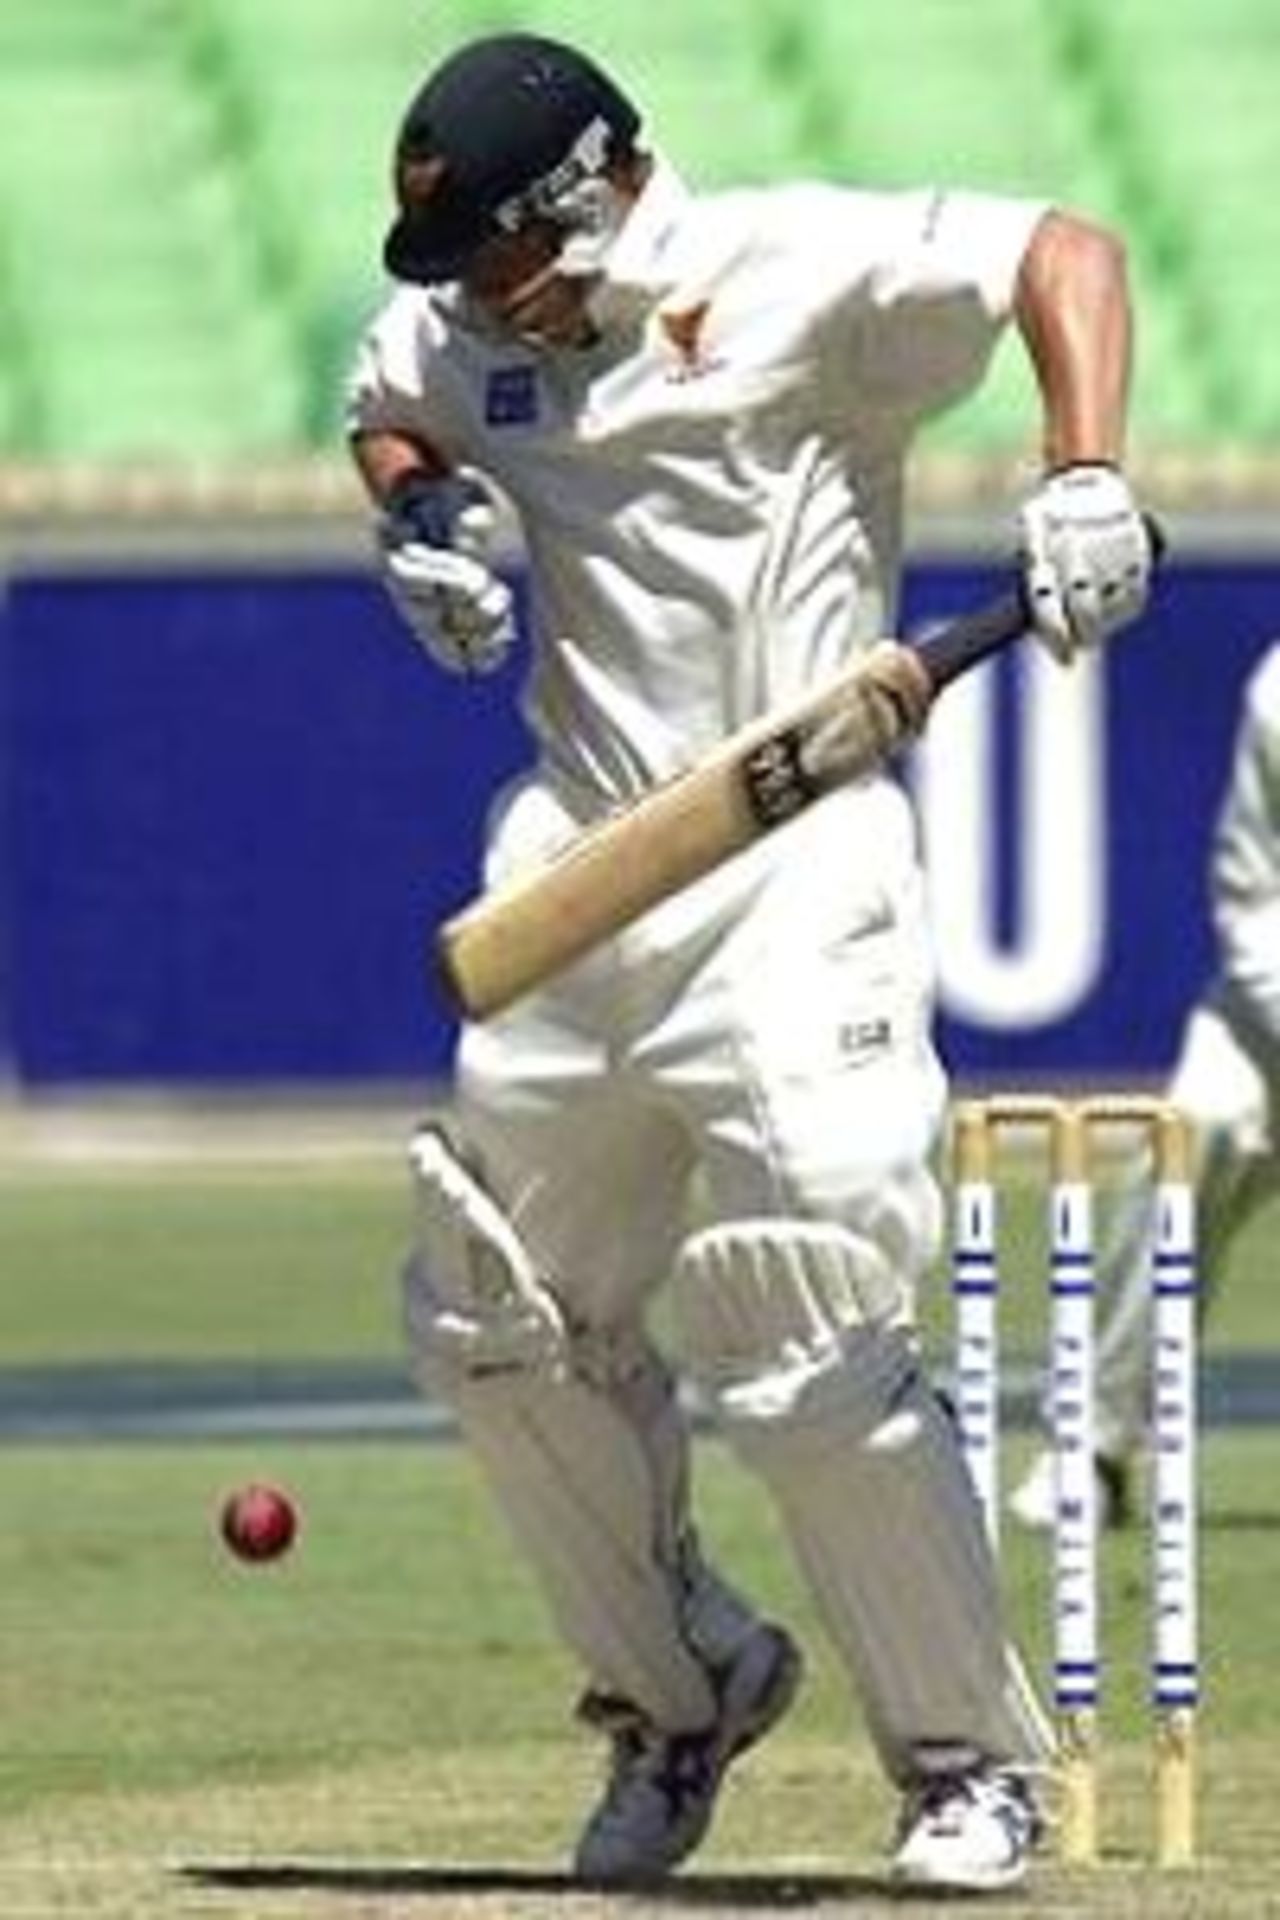 10 Mar 2001: Shane Watson of Tasmania in the Pura Cup match between the Tasmanian Tigers and Western Australia's Western Wariors played at the WACA ground in Perth today.